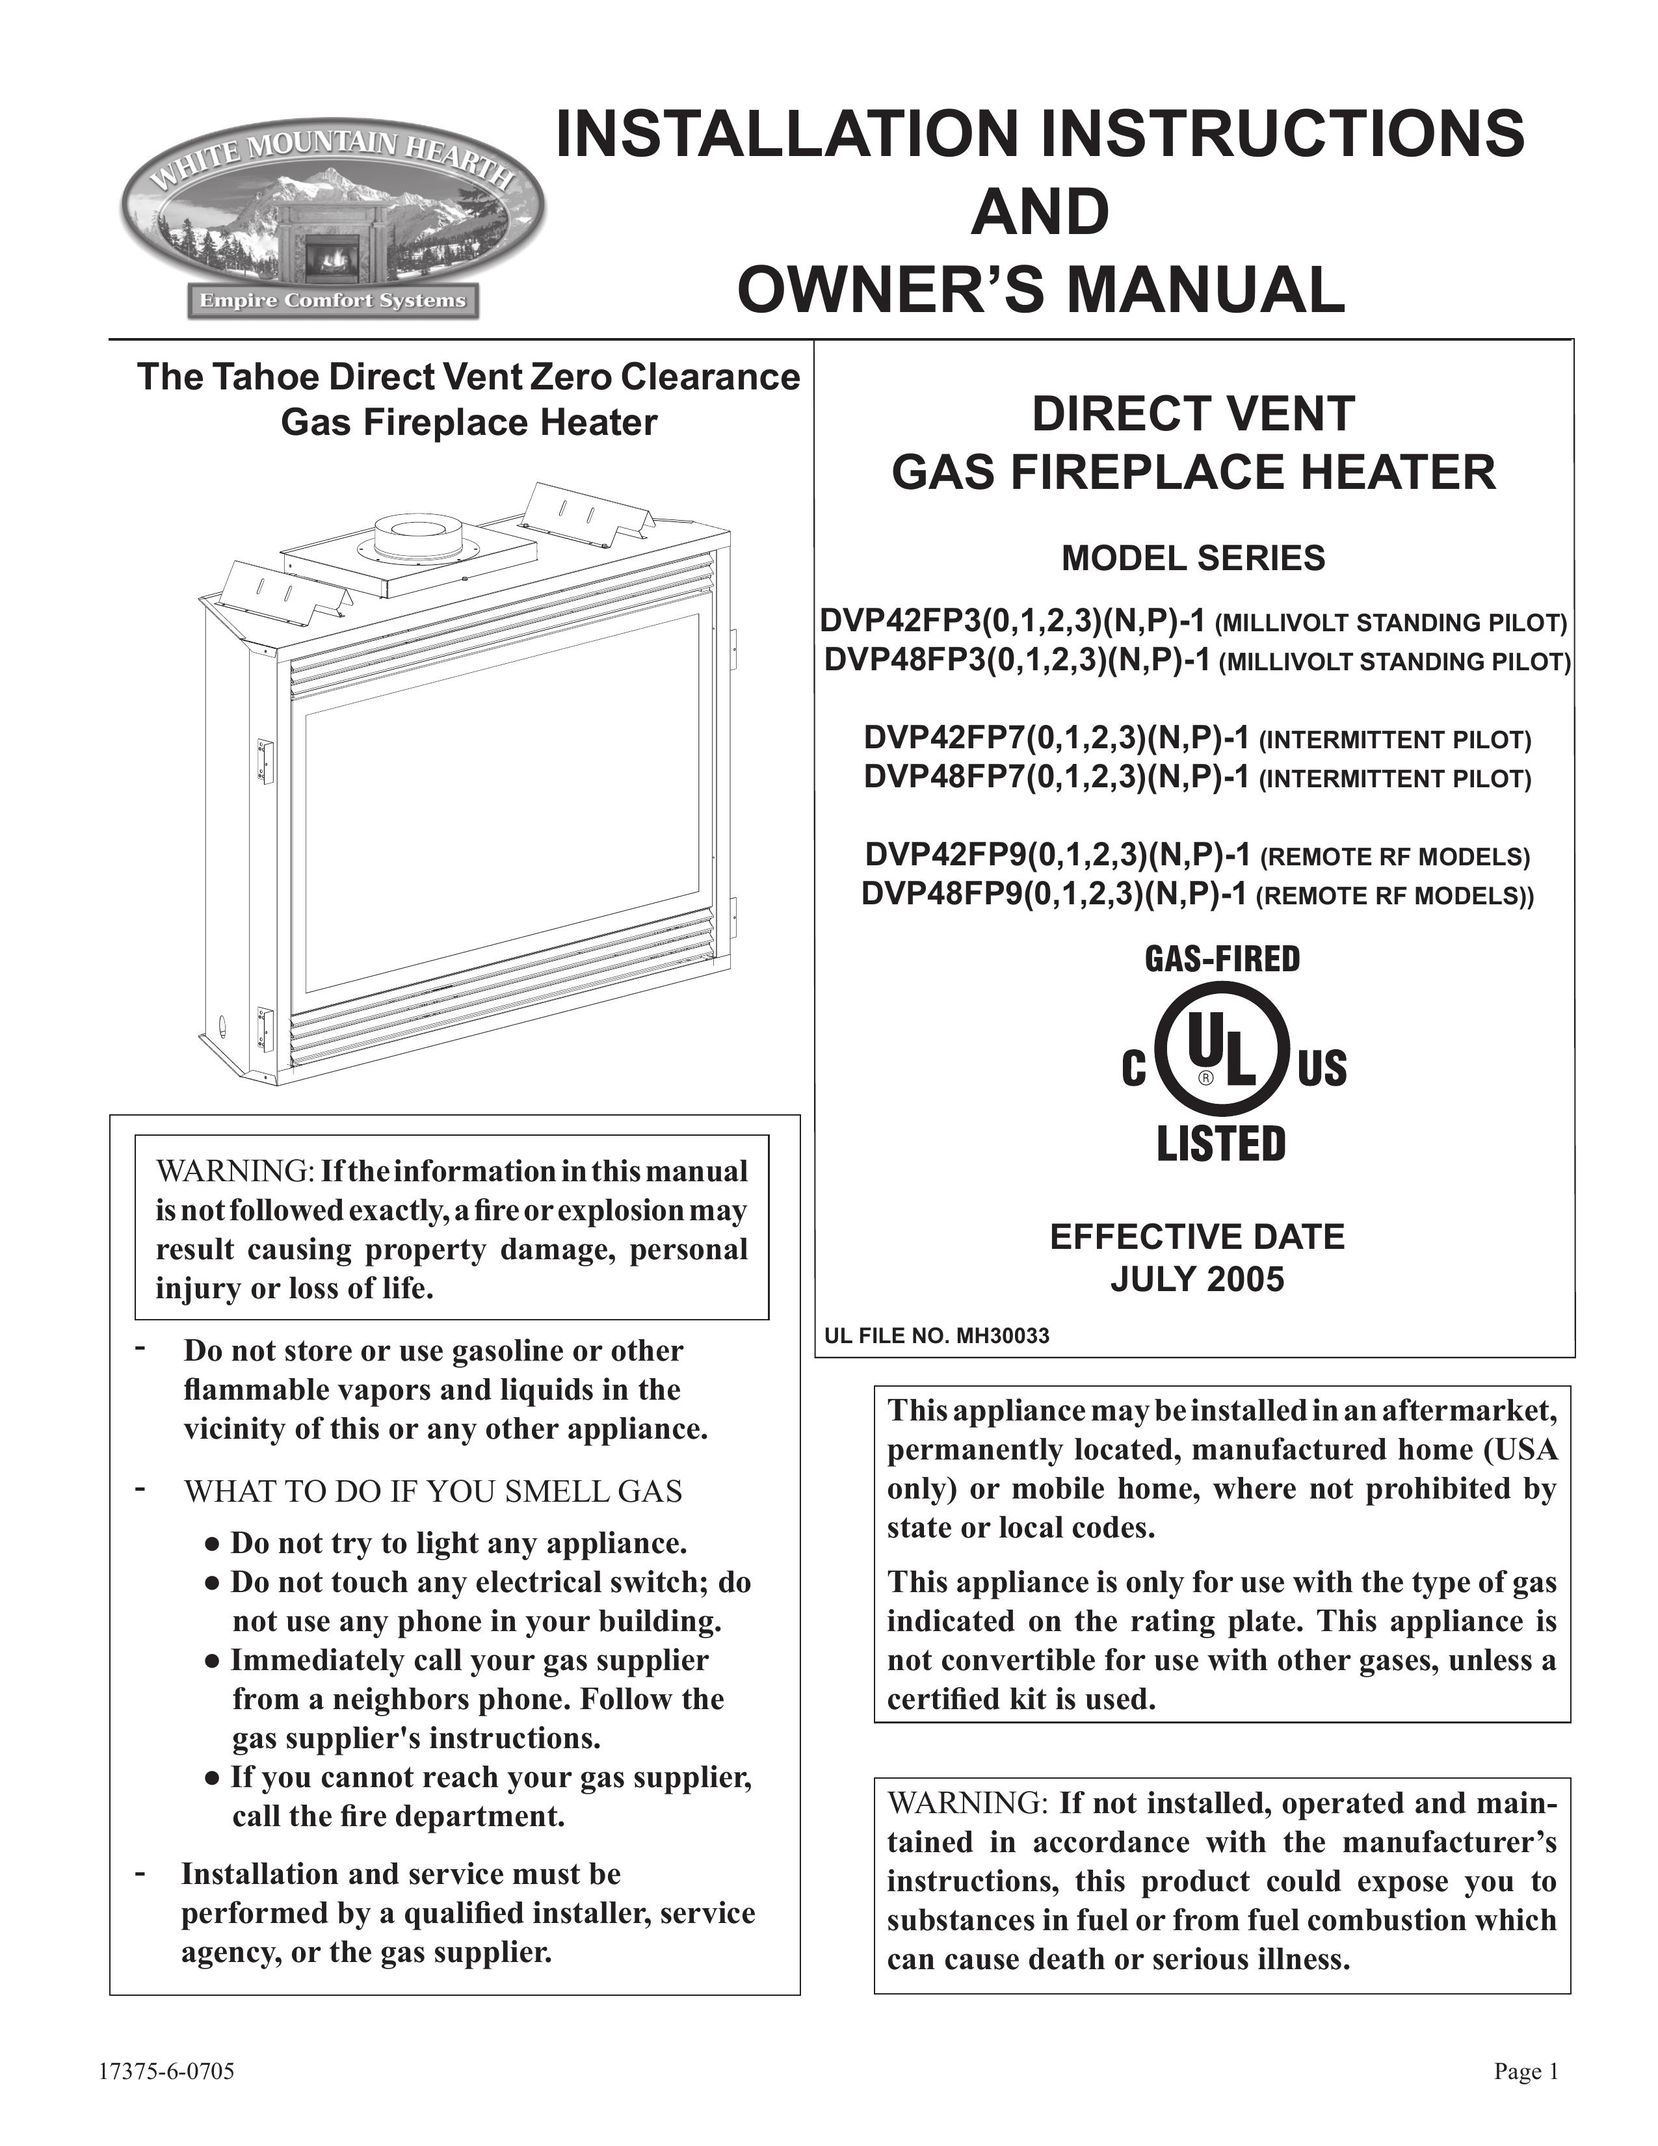 Empire Comfort Systems DVP42FP7 Water Heater User Manual